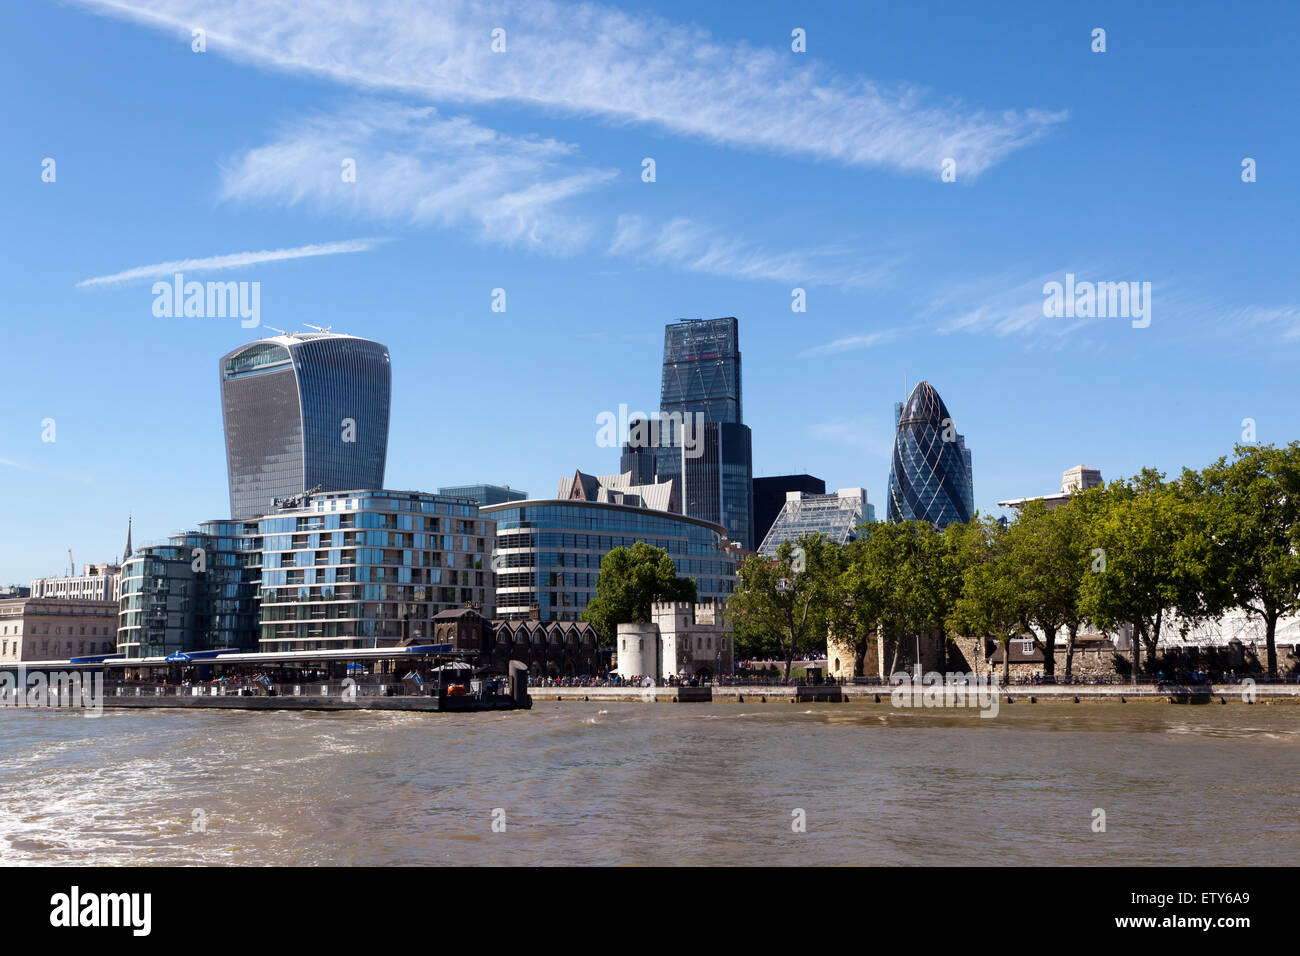 View from the River Thames, looking toward the Tower of London, Tower Place and the City of London Financial District. Stock Photo